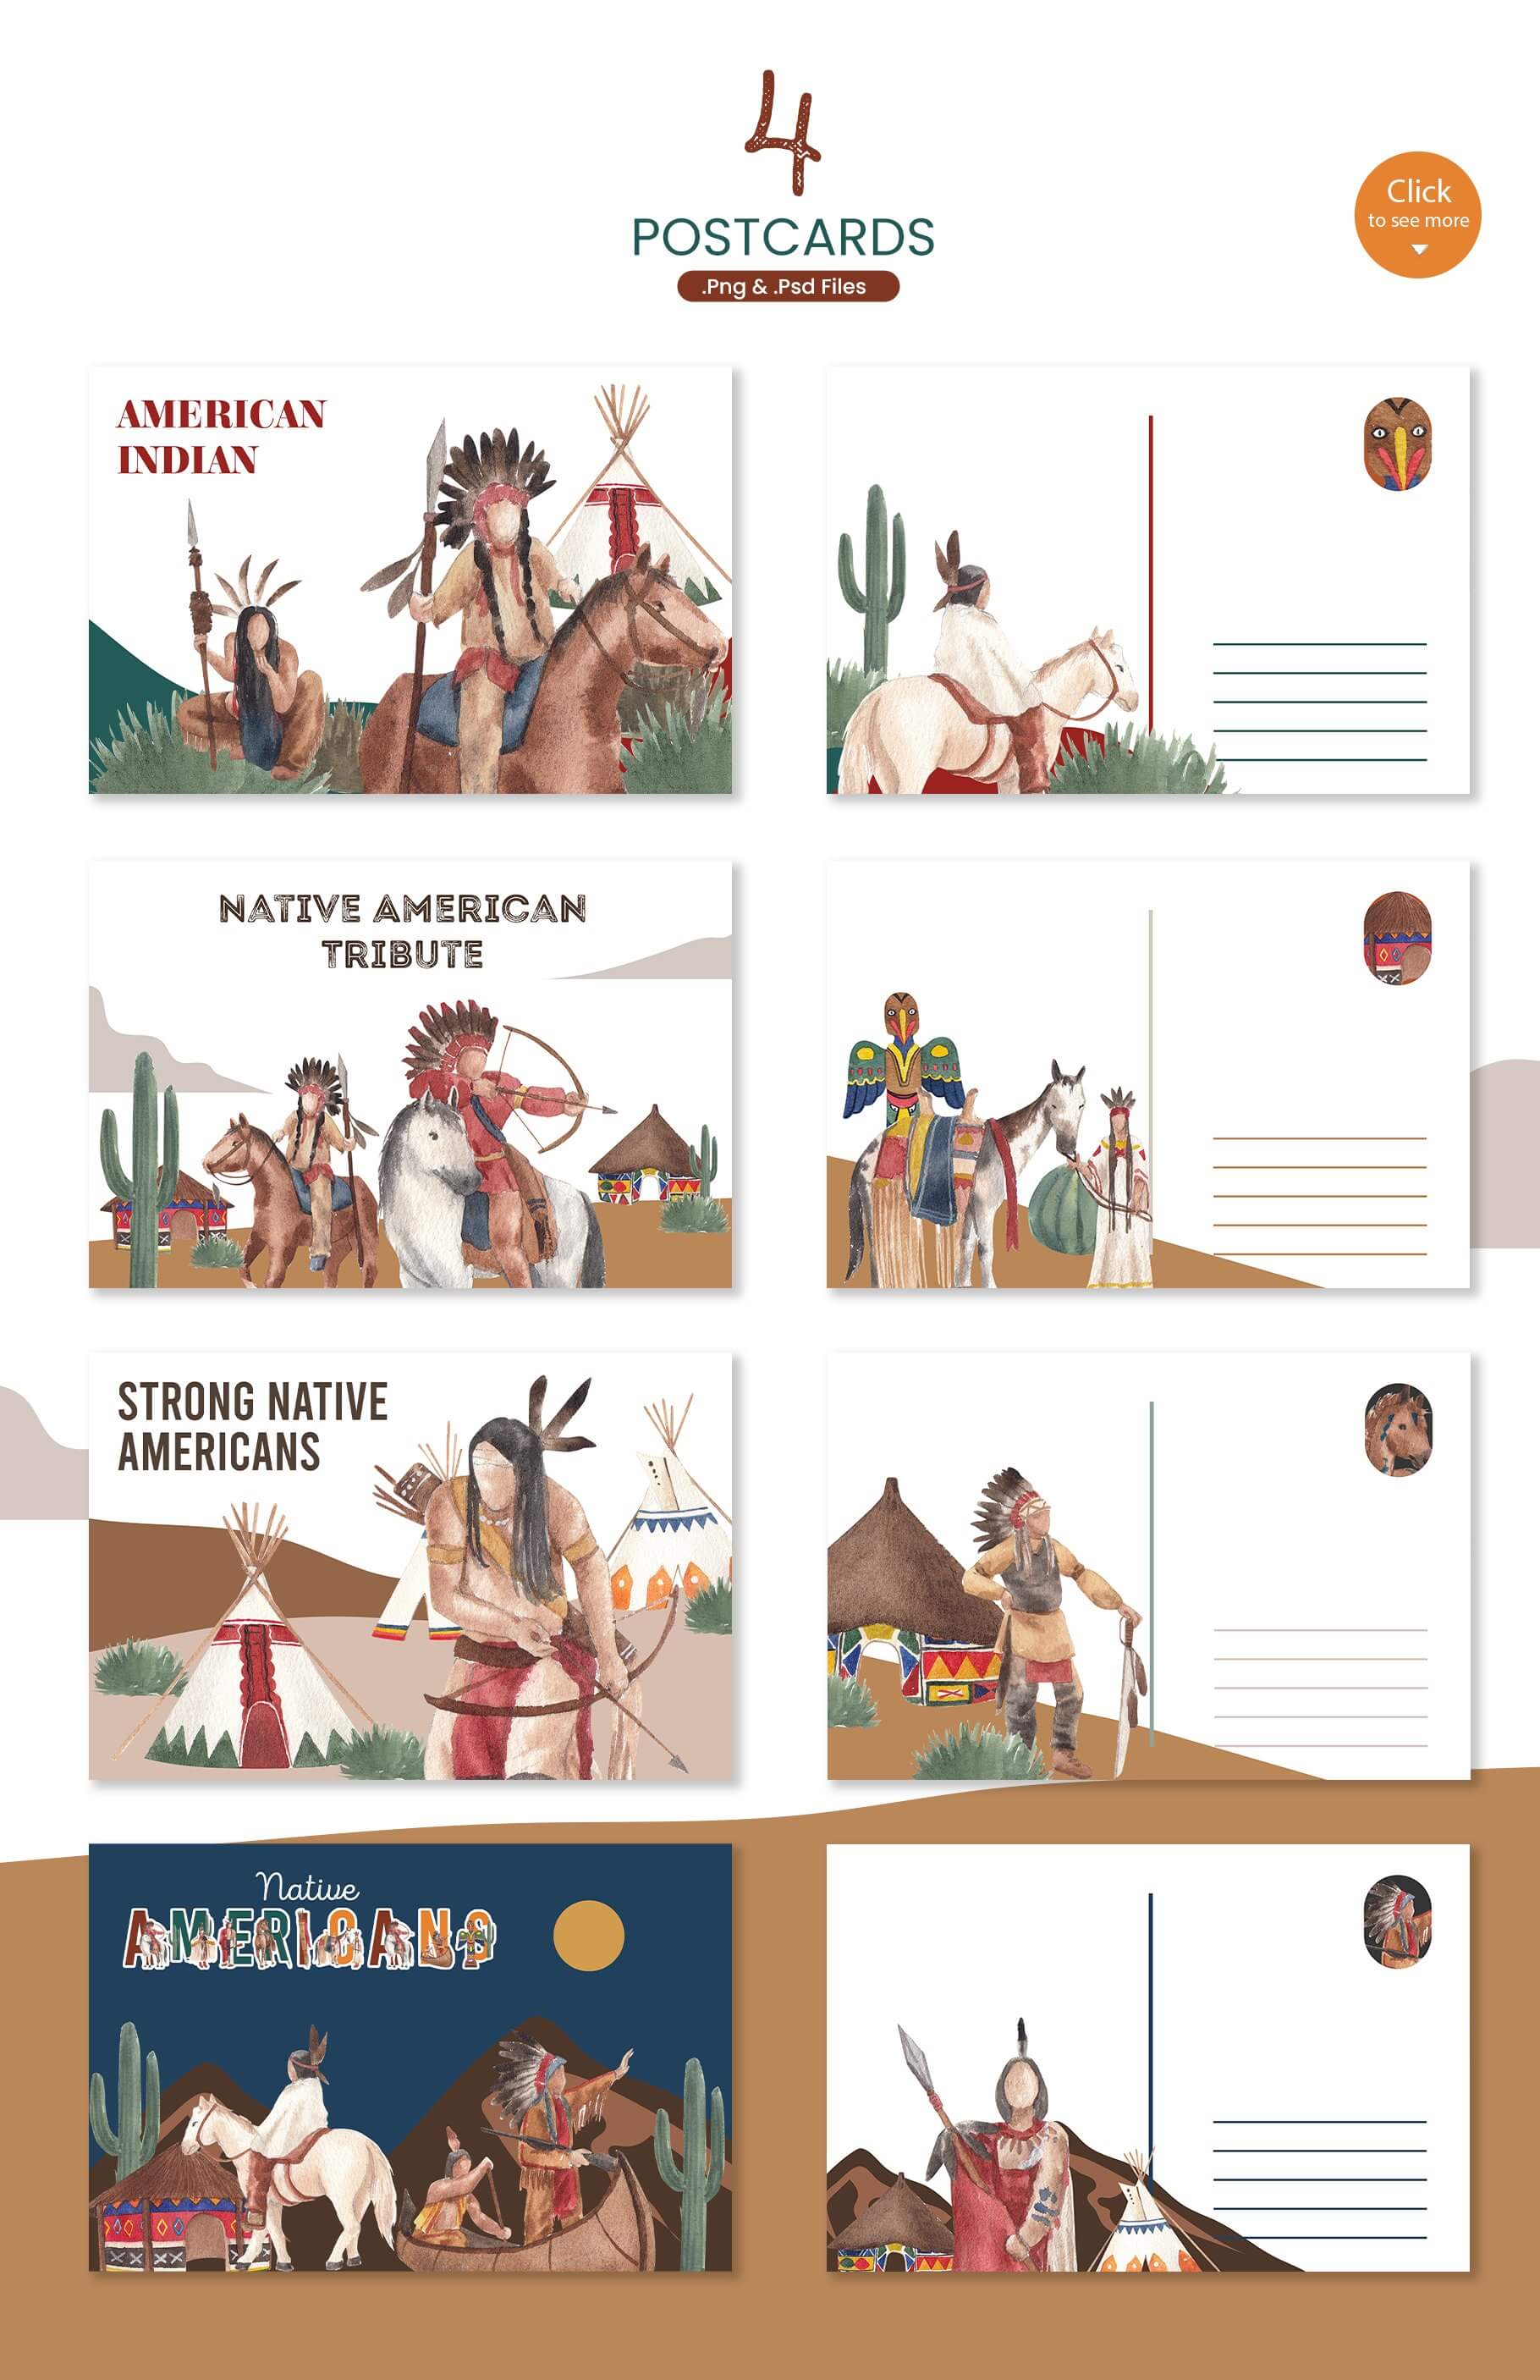 native americans vintage style watercolor illustration postcards example.